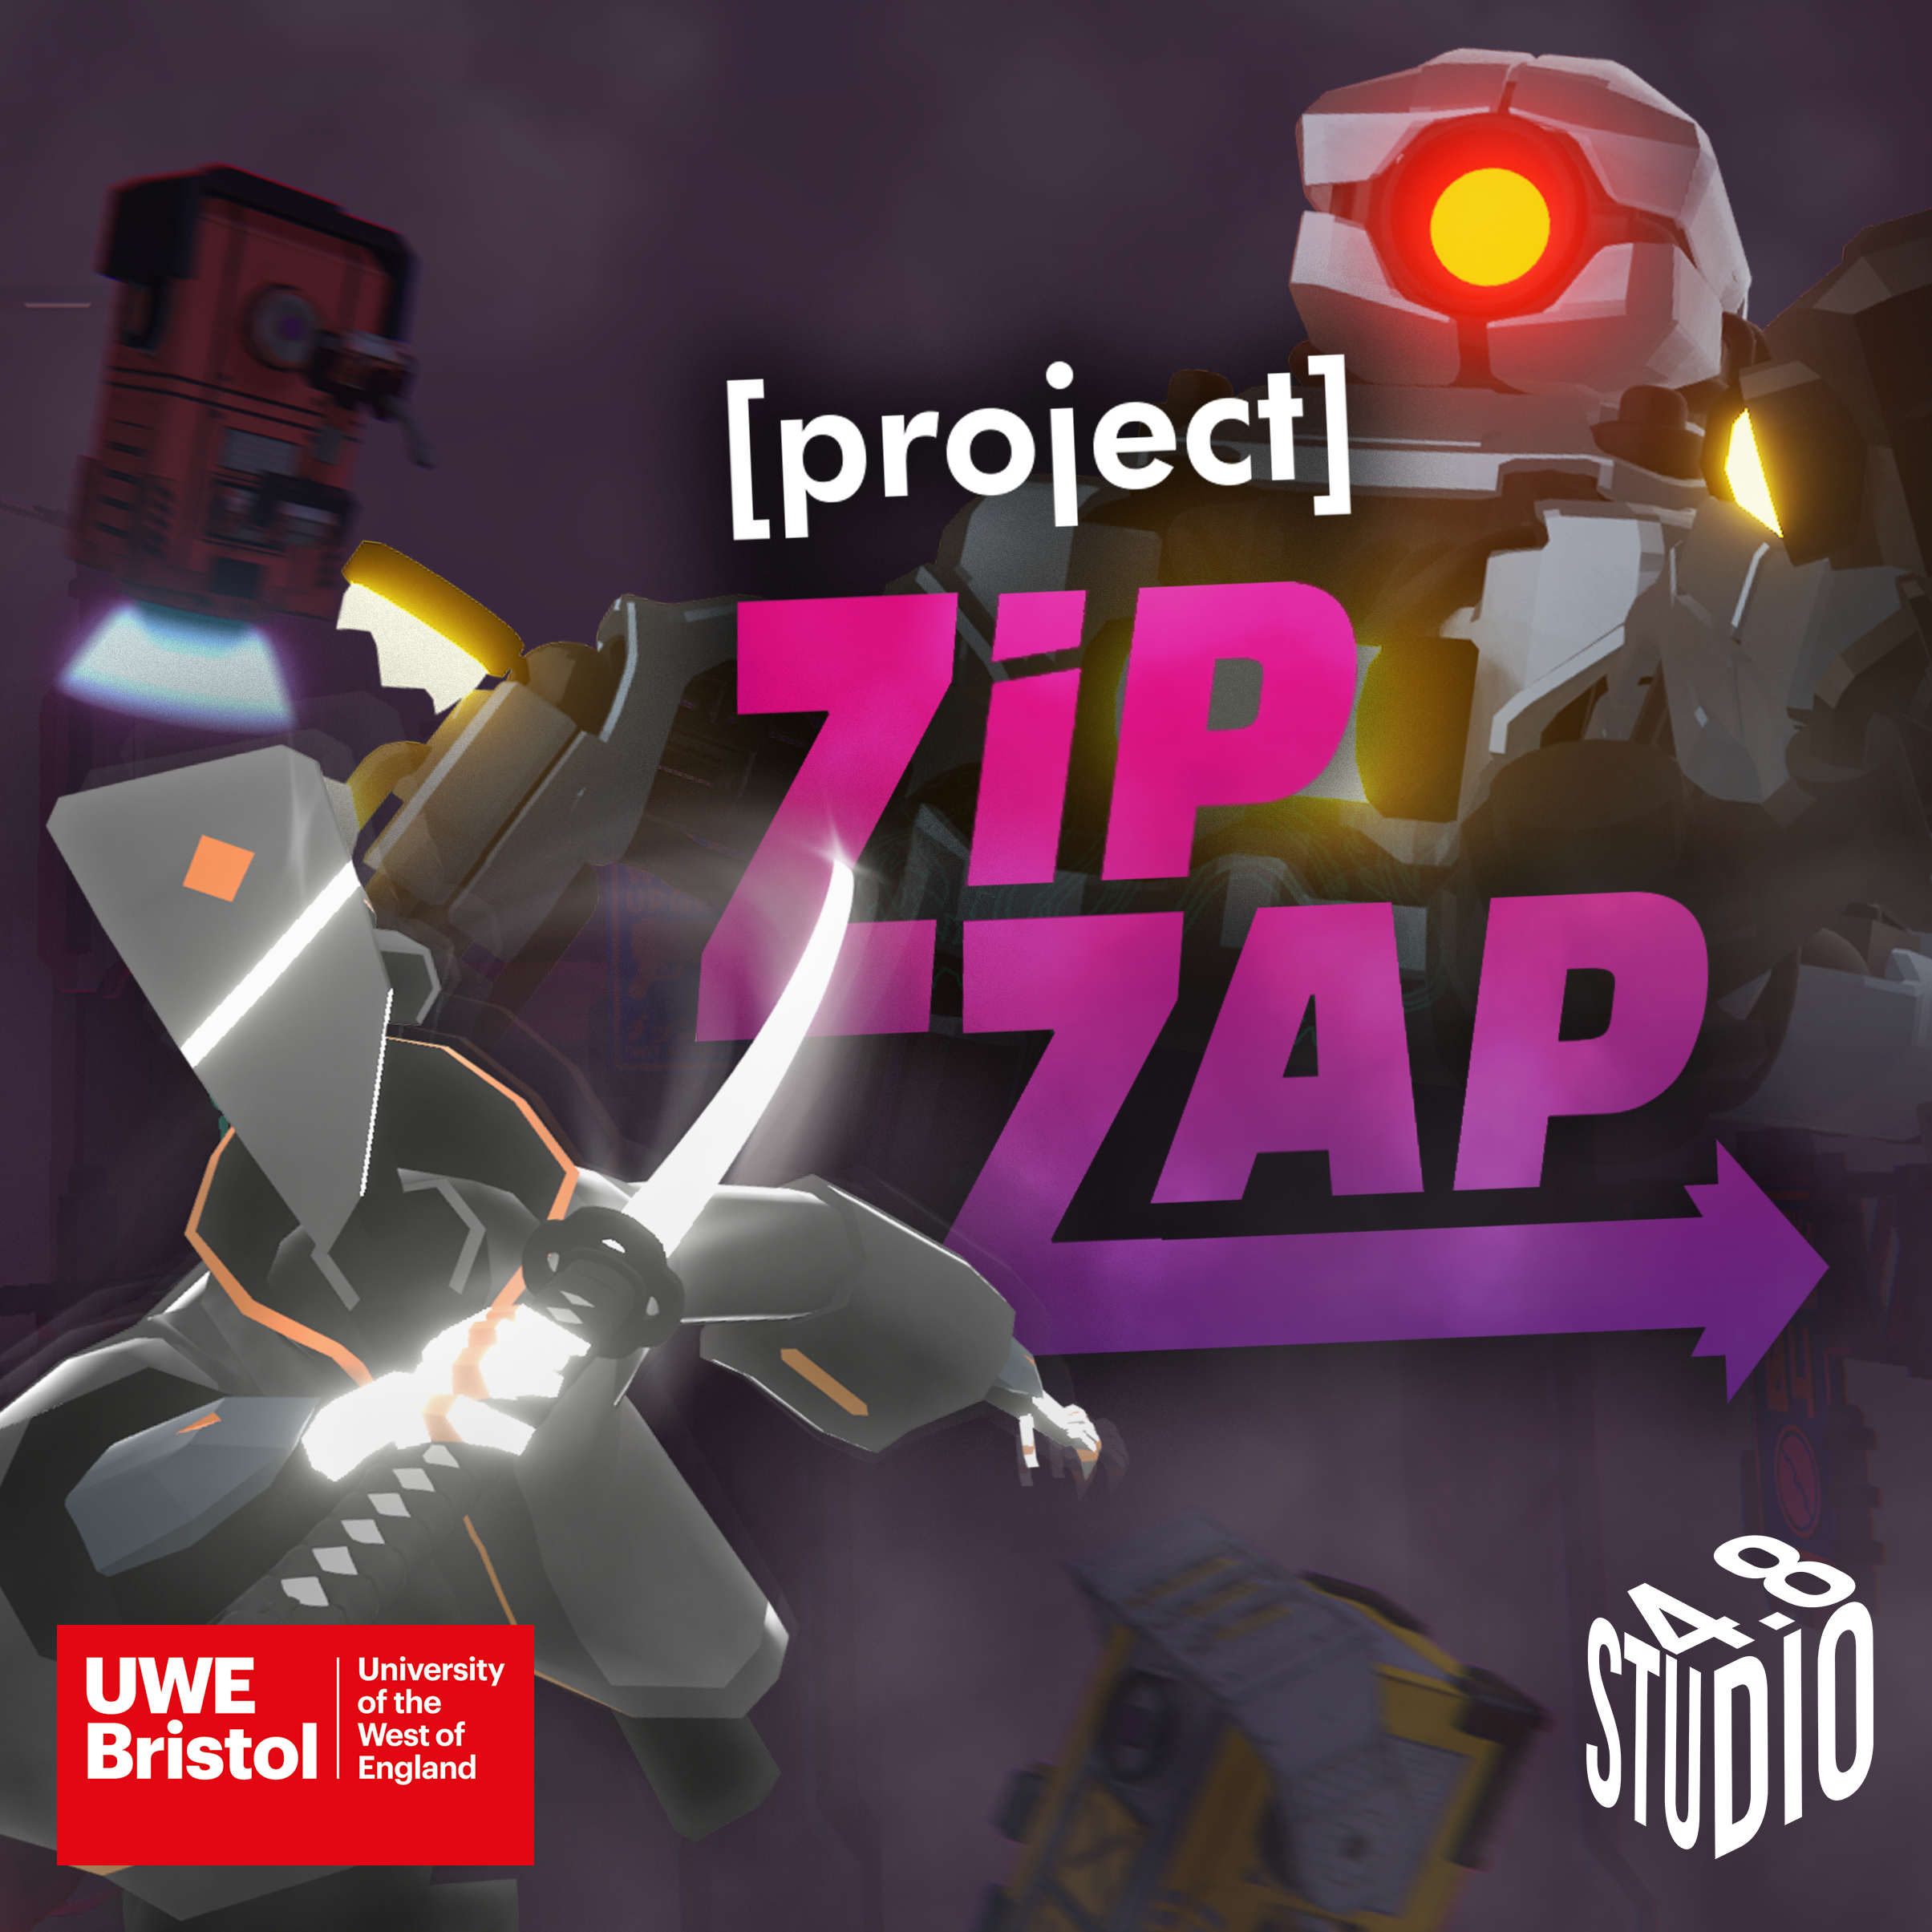 Find out more about Unity - Project Zip Zap